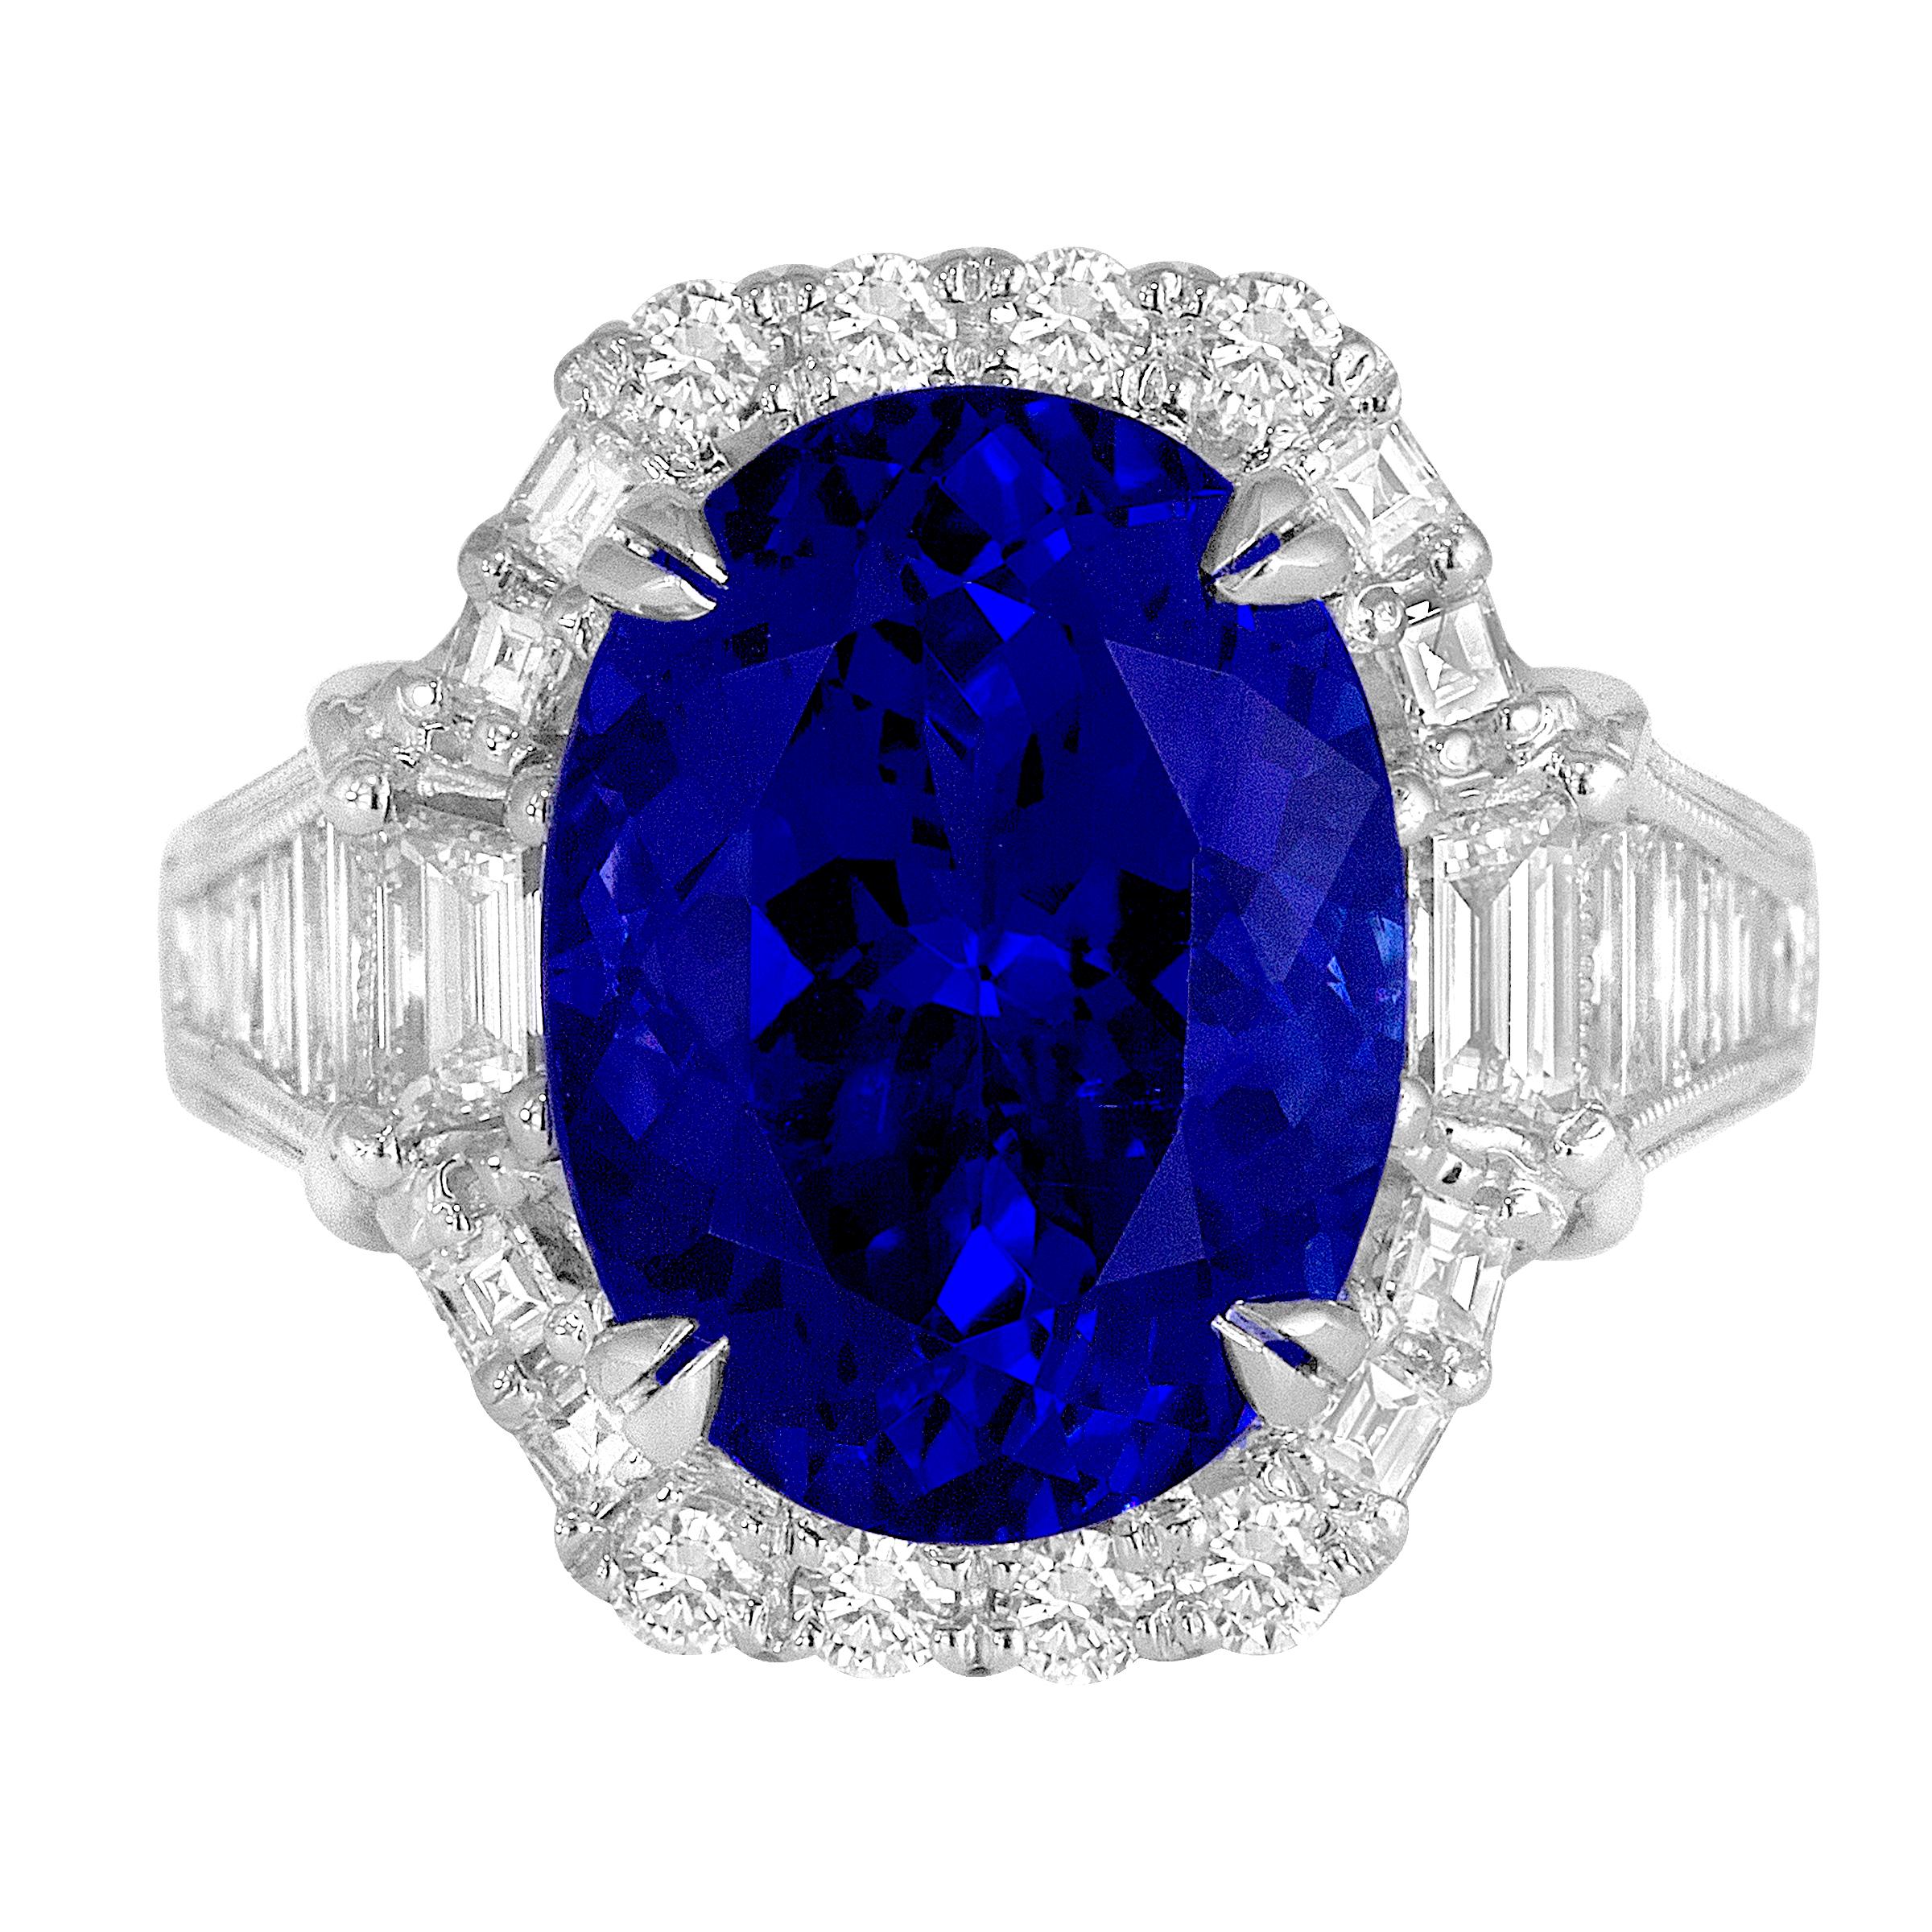 This gorgeous ring holds an 8.30 carat oval cut bluish violet Tanzanite center, surrounded by a halo of round and baguette diamonds. Additional baguette diamonds decorate the side shank.

Center: 8.30 Carat oval cut Tanzanite
Total diamond weight